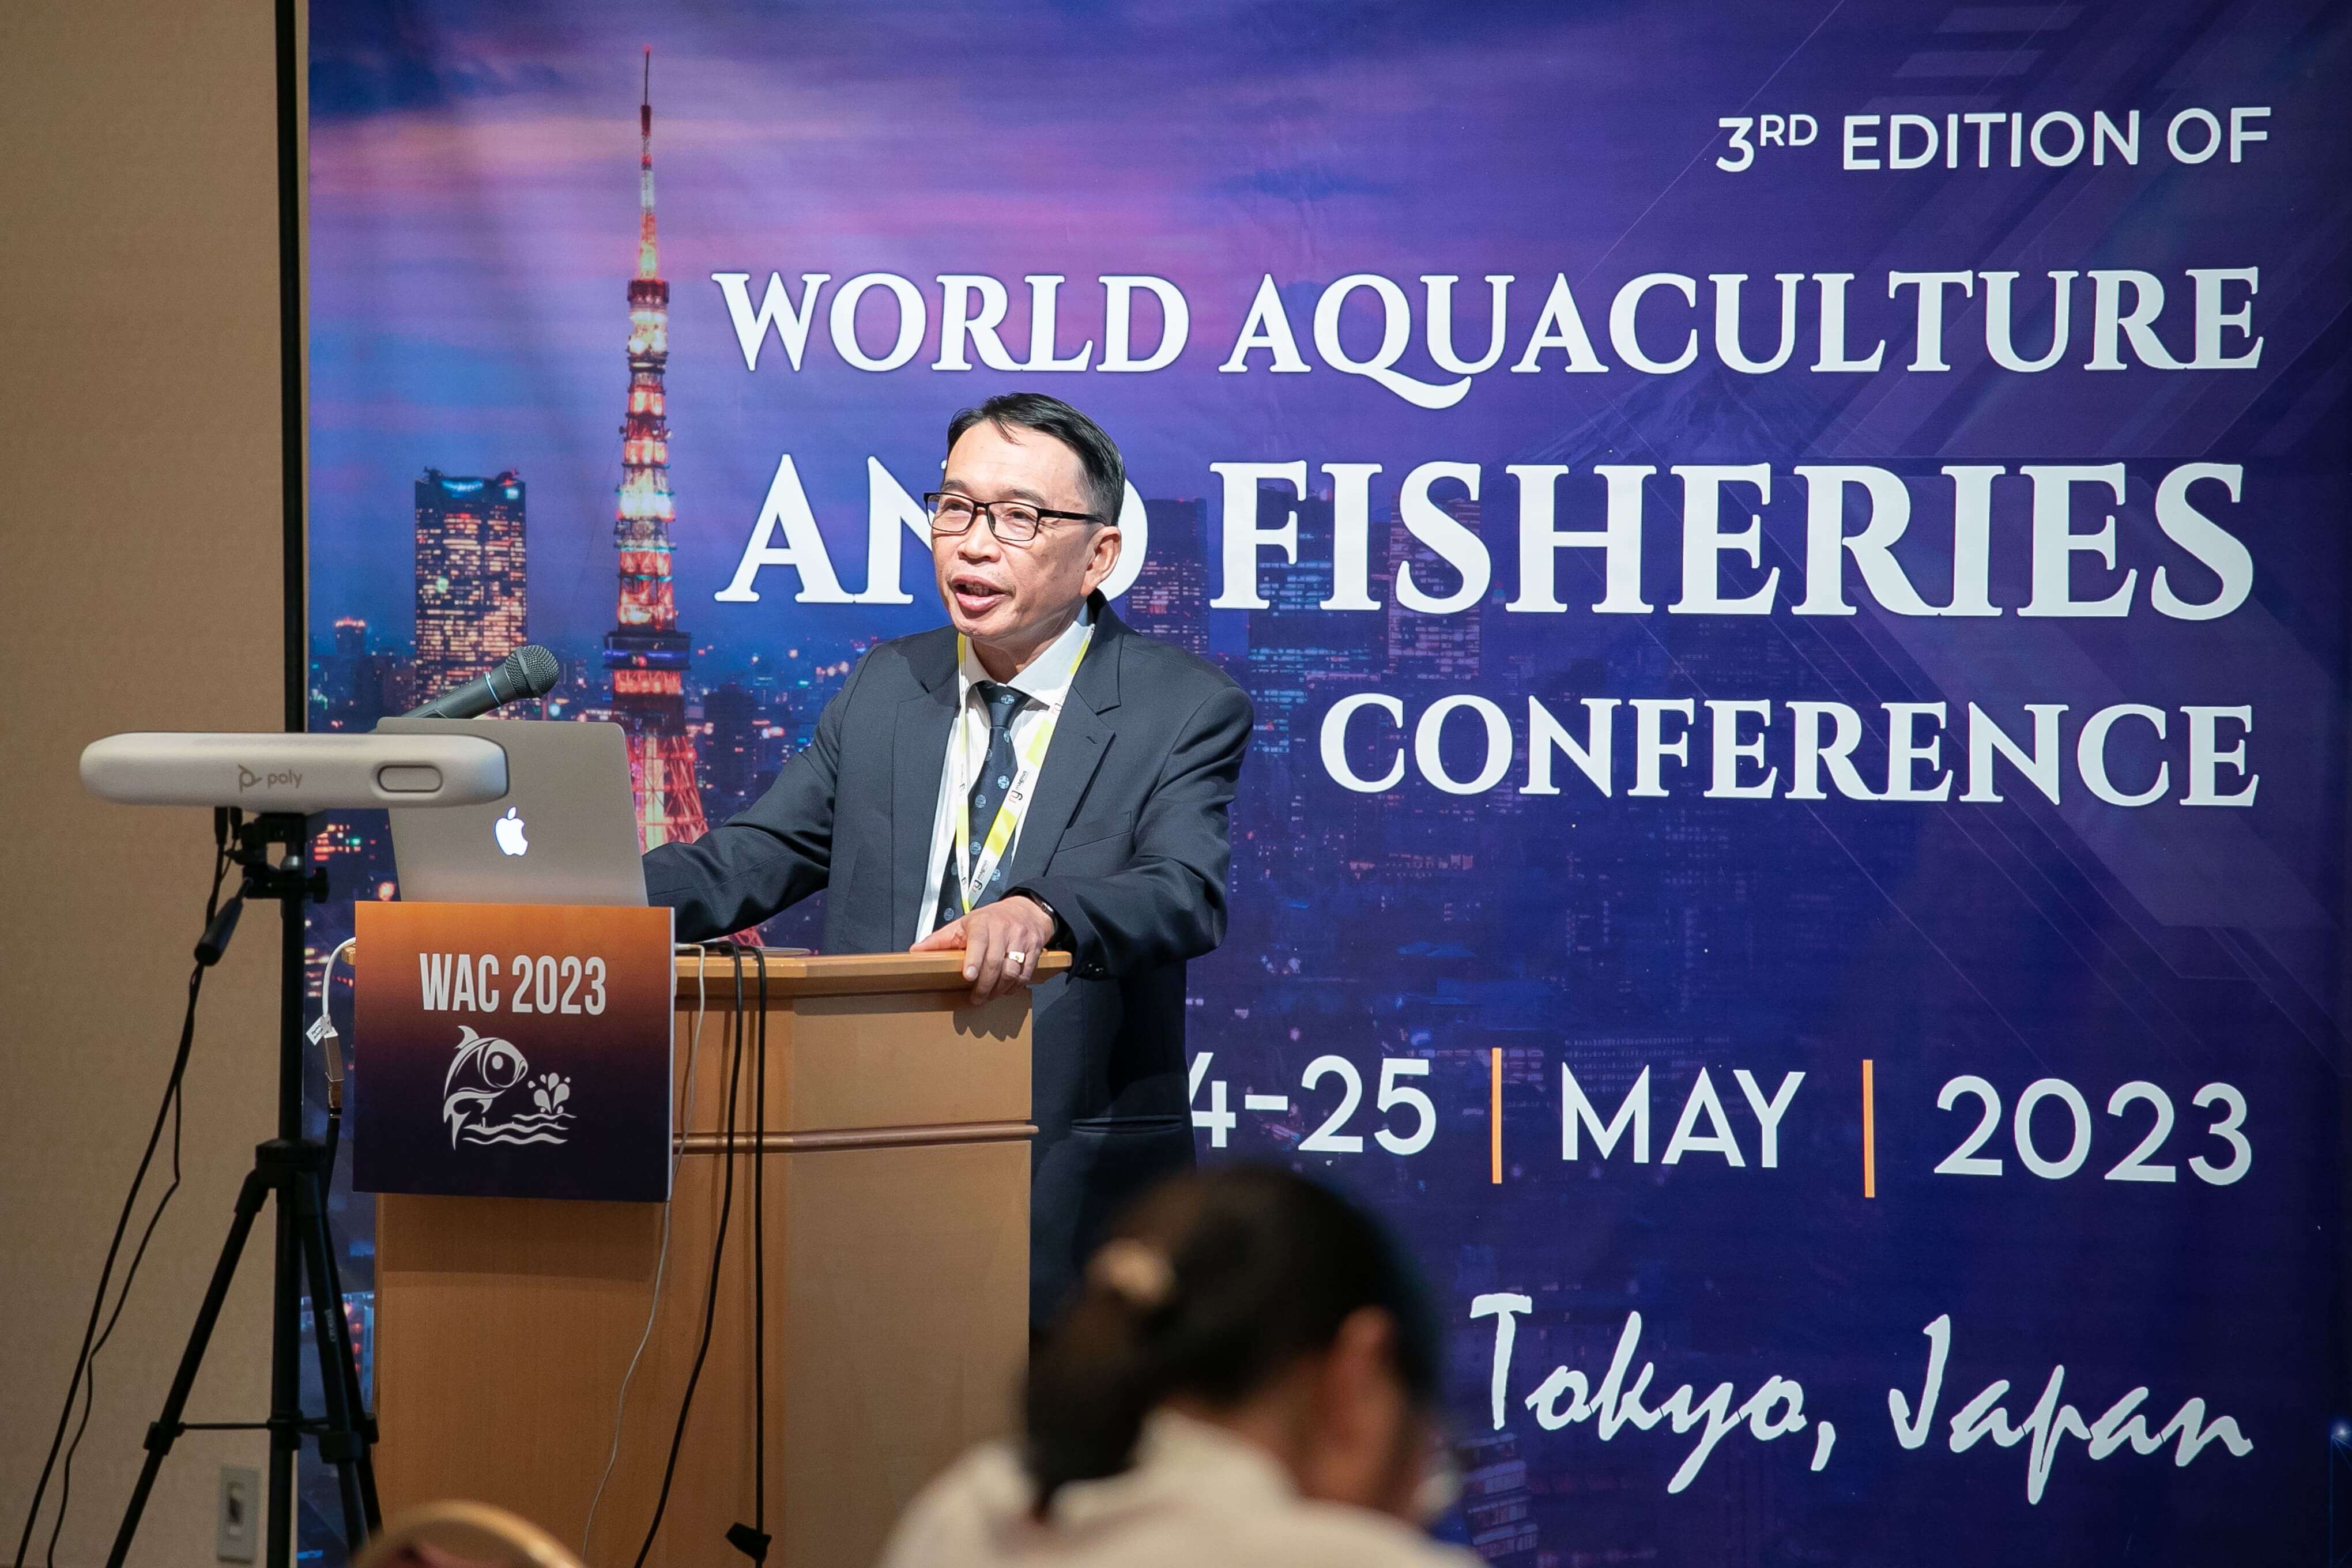 Fisheries Conferences